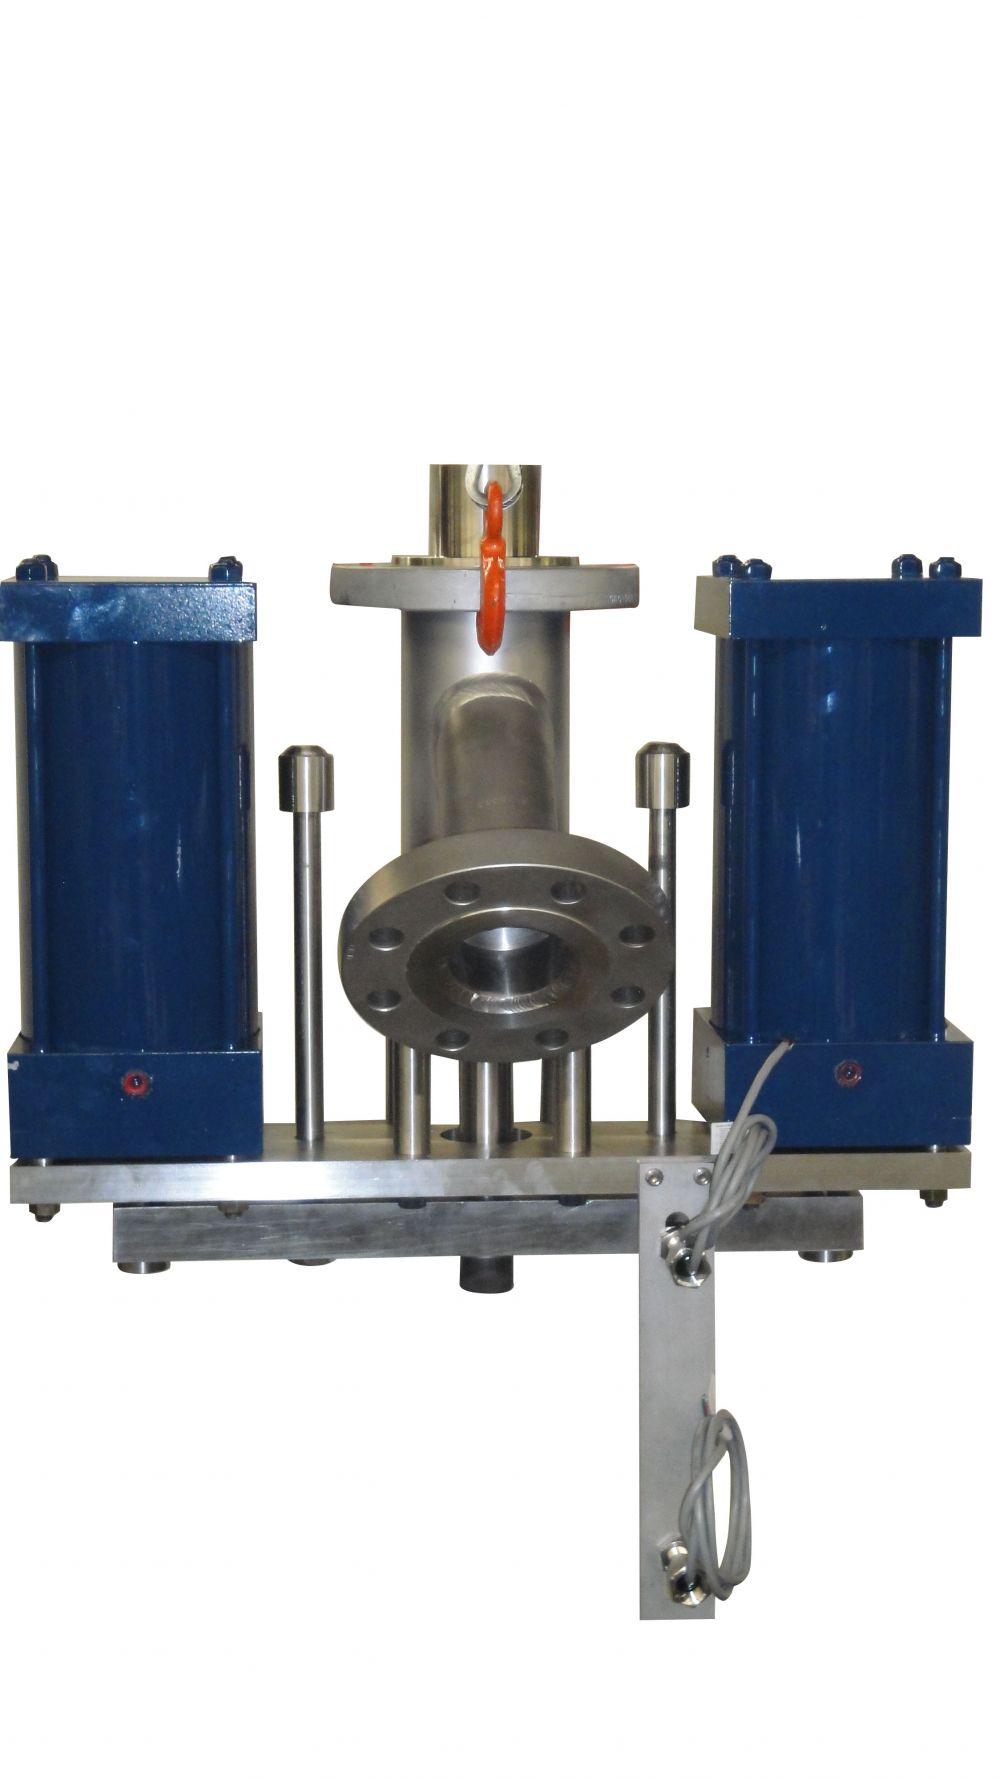 Ram-Seal valve with dual pneumatic cylinders